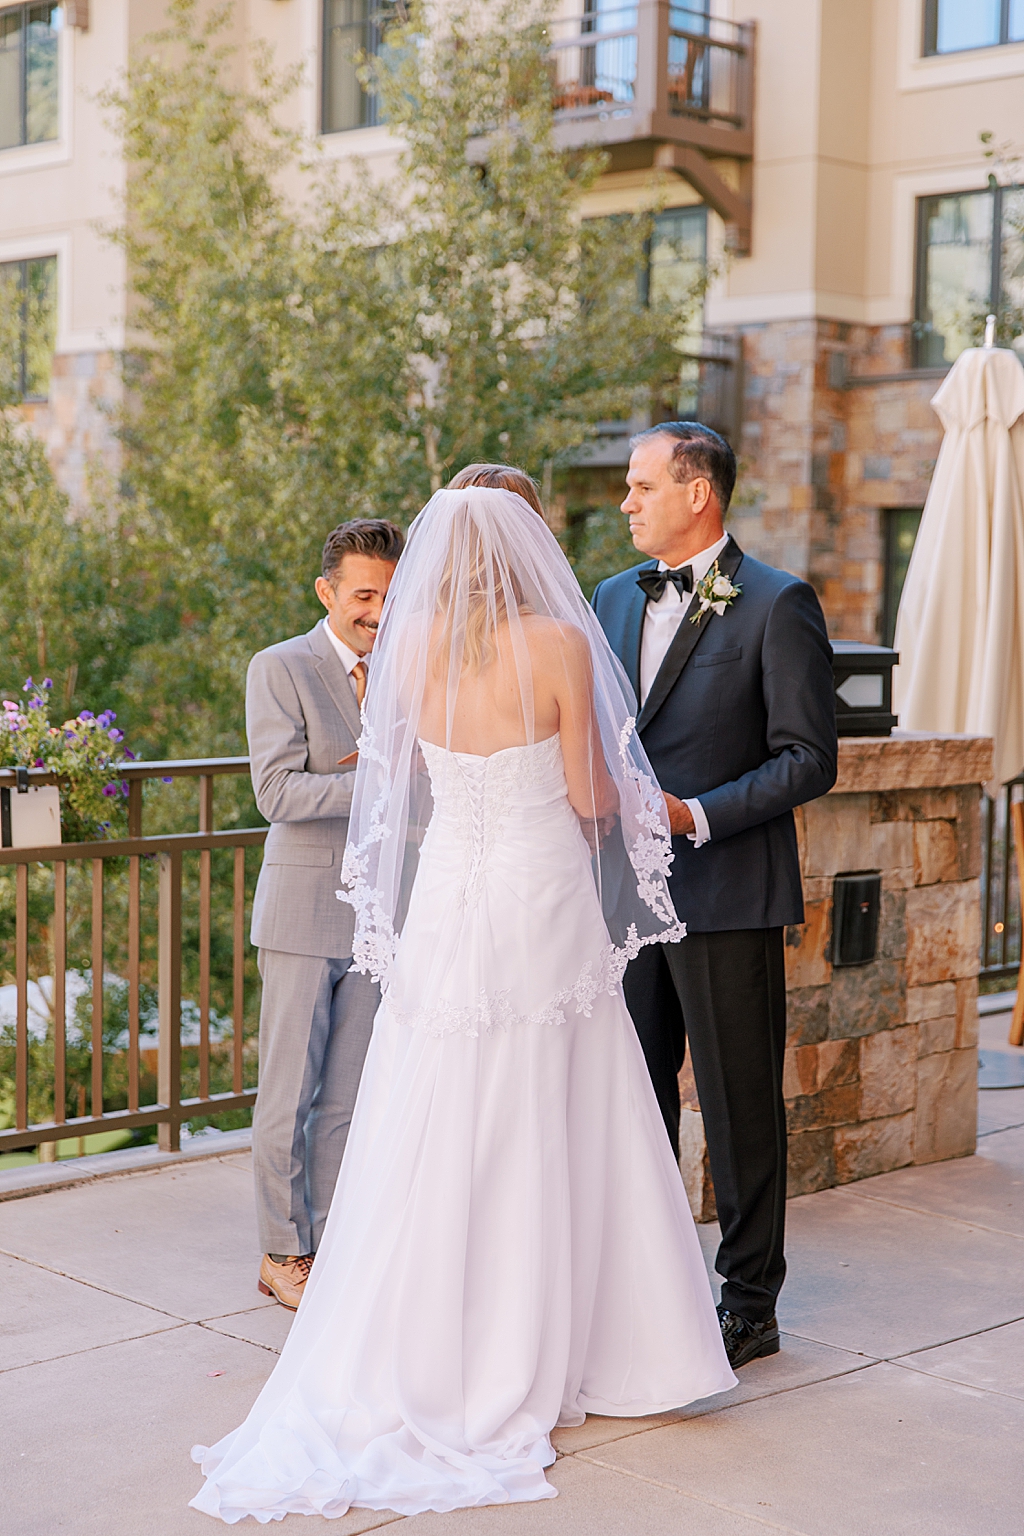 get-married-just-the-two-of-you-in-vail-at-four-seasons-hotel